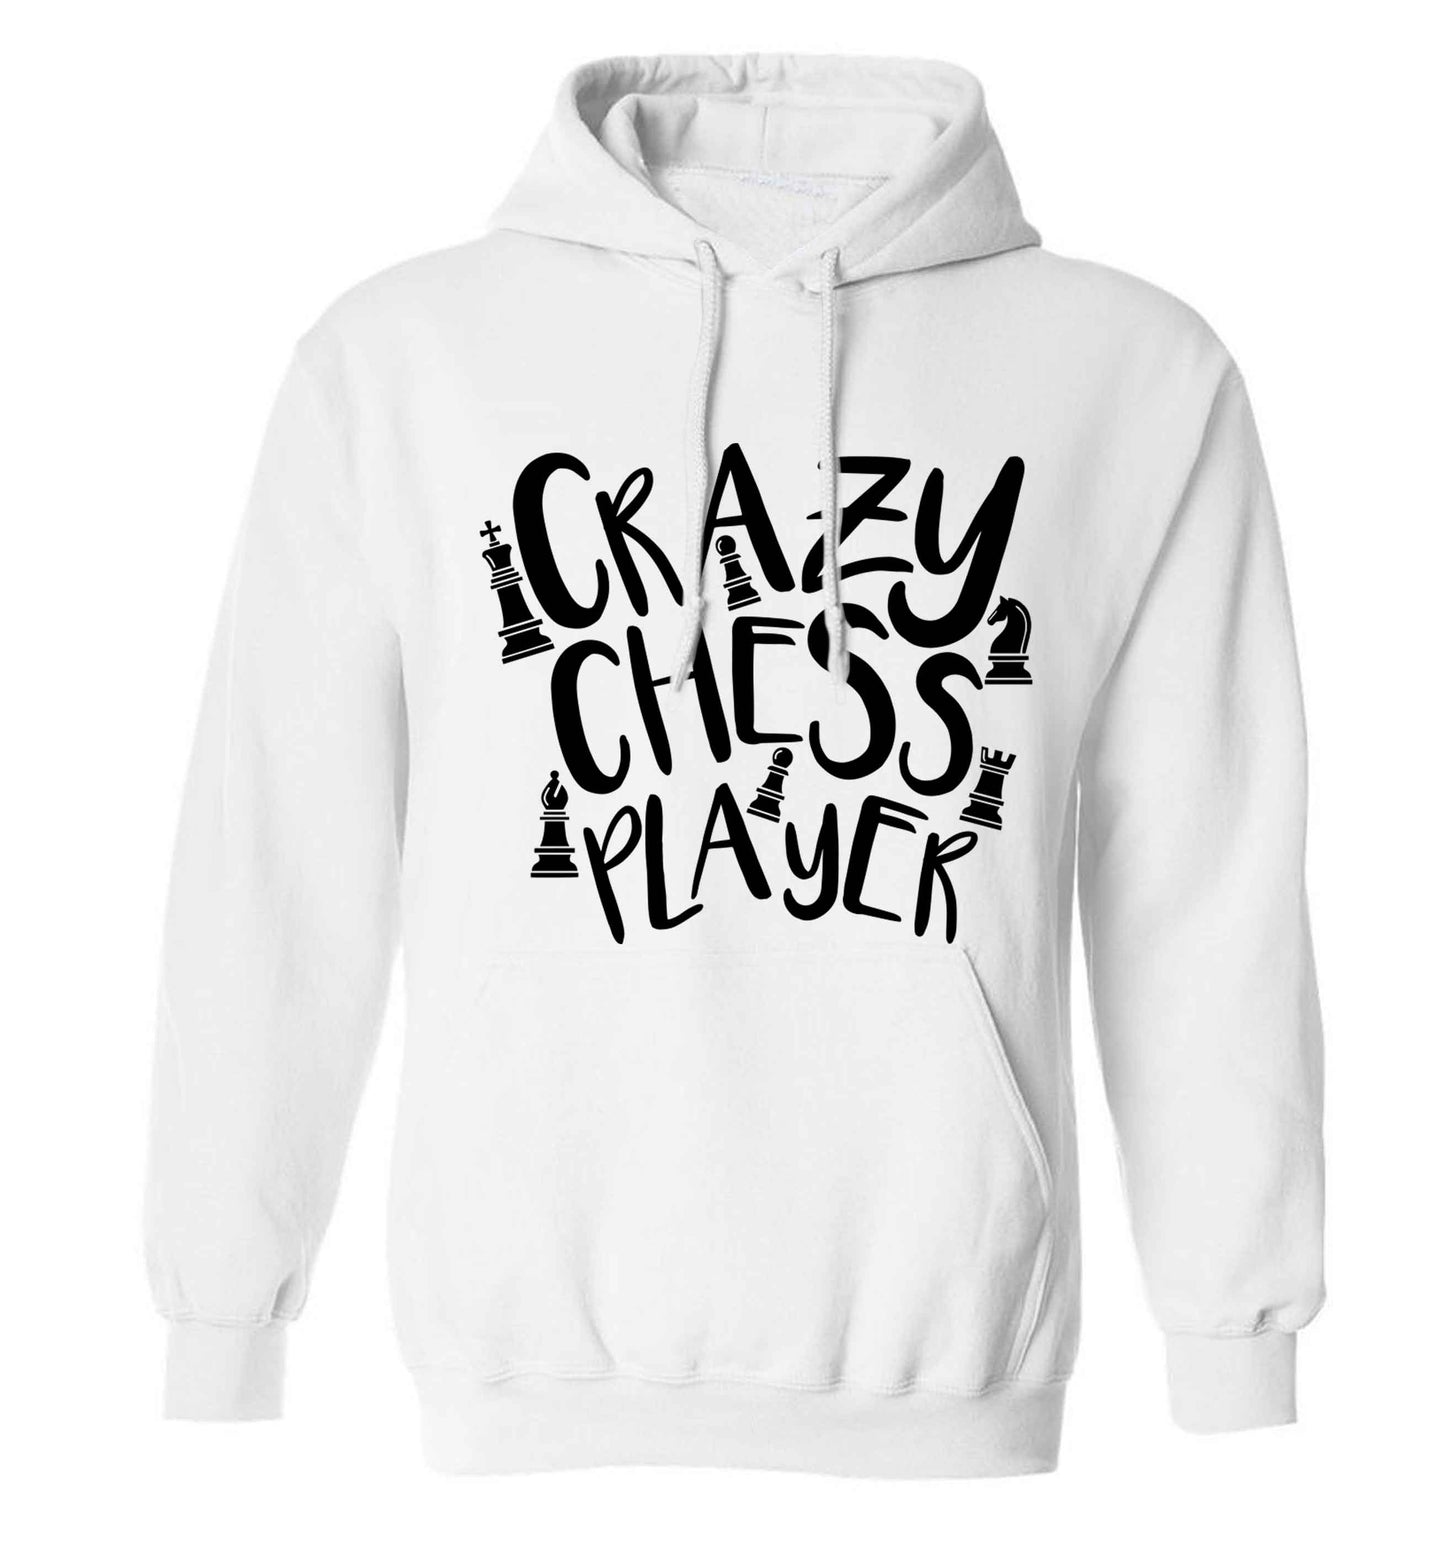 Crazy chess player adults unisex white hoodie 2XL